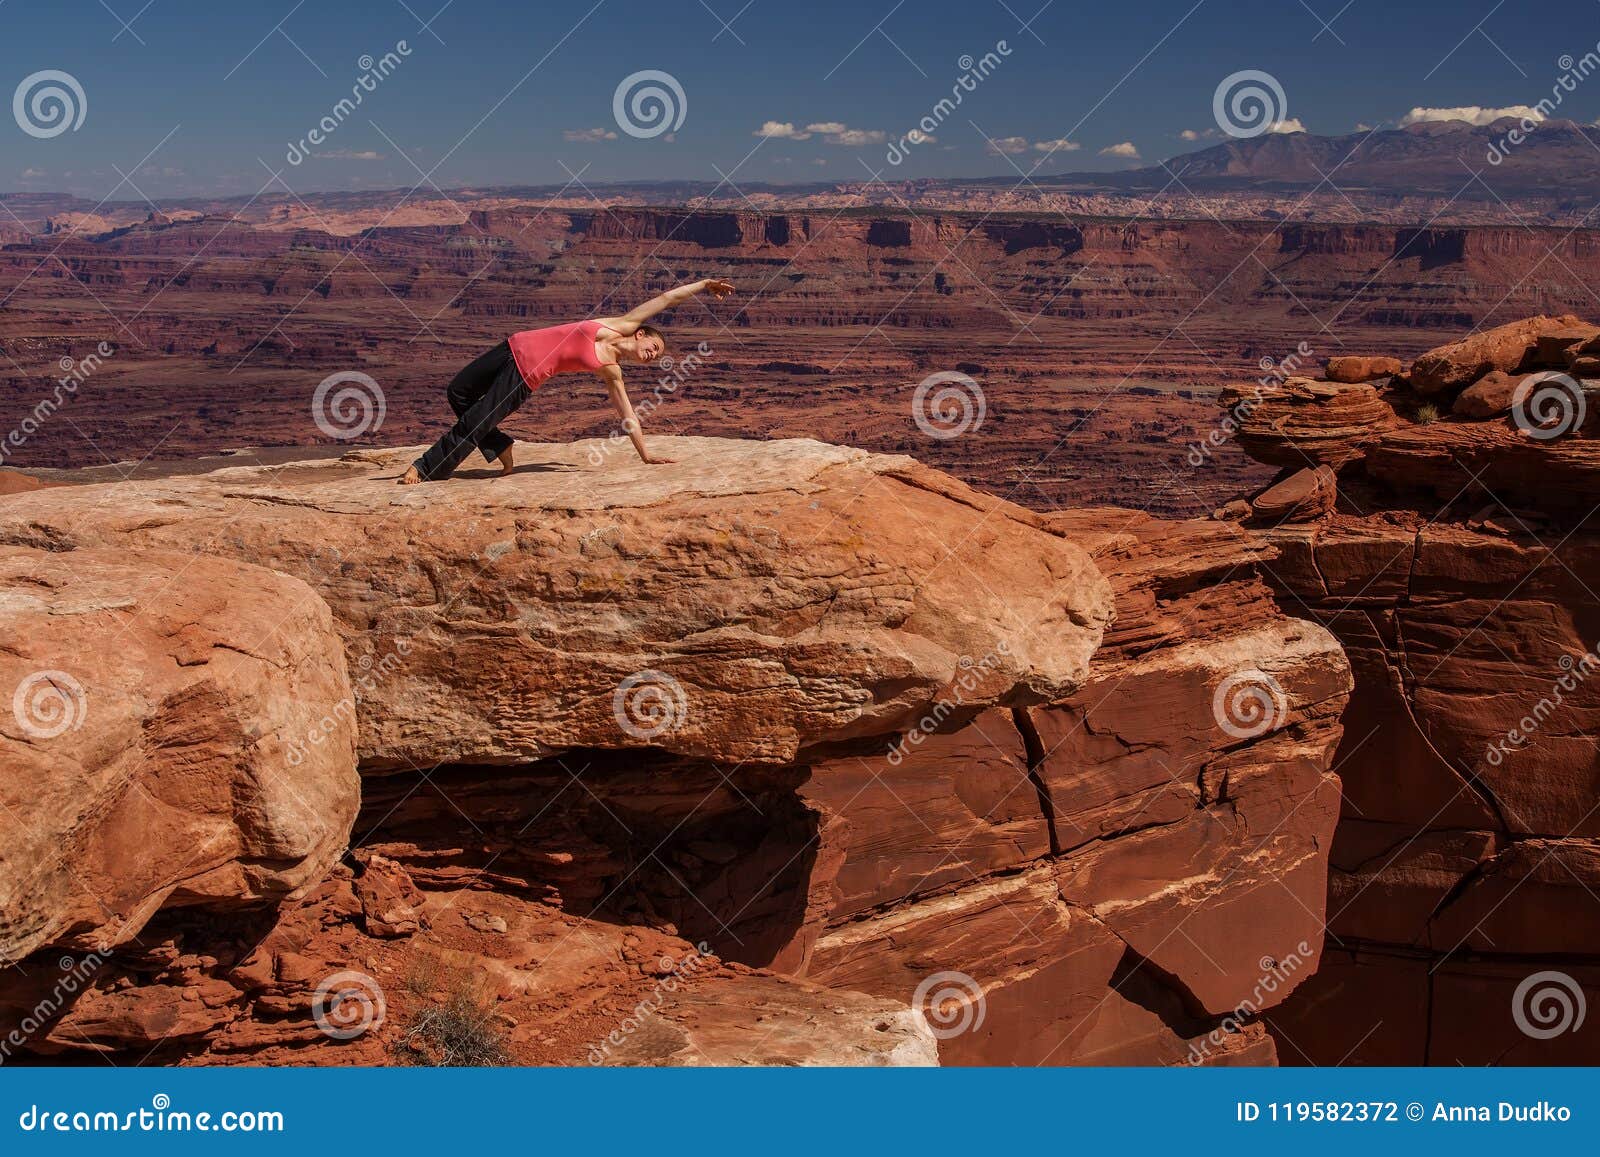 Woman Meditating And Relaxing On Mountain Top. Stock Photo 